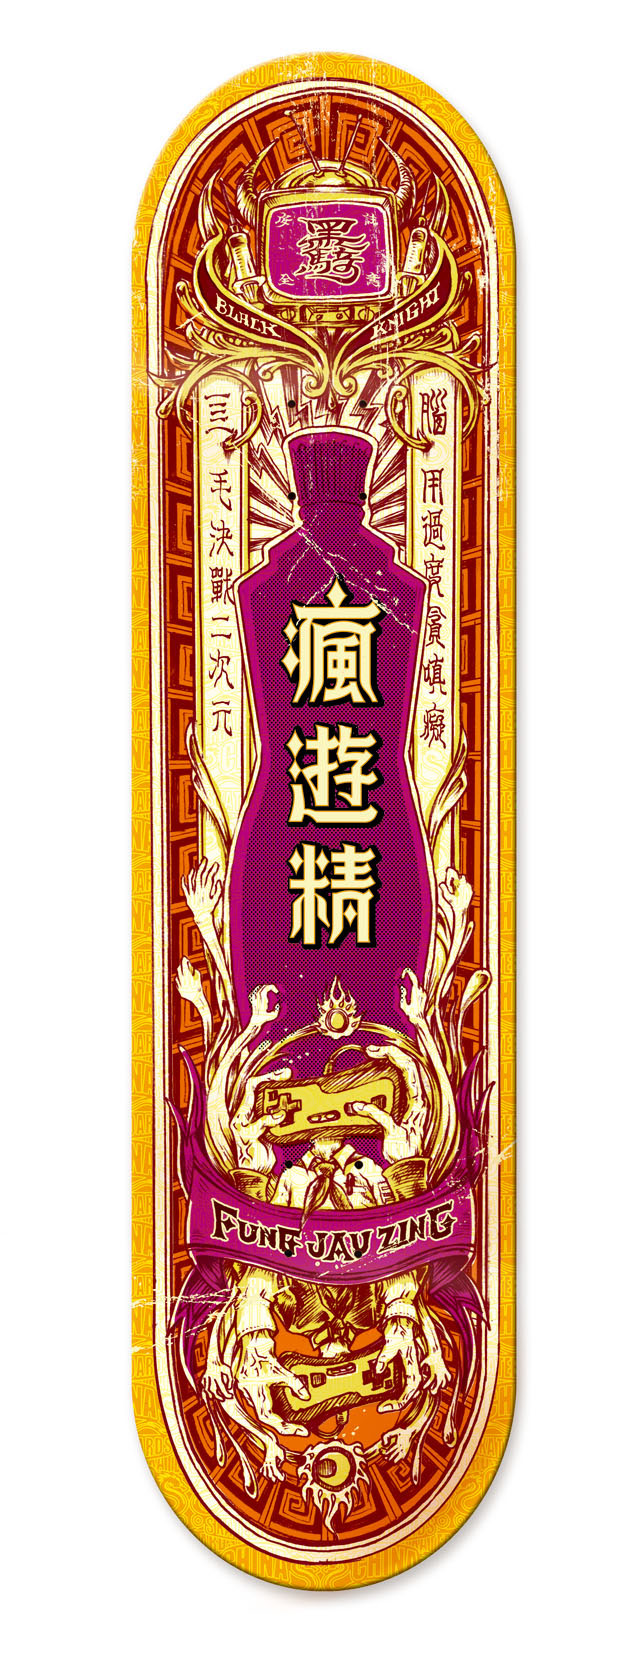 What Chinese medicine skateboard